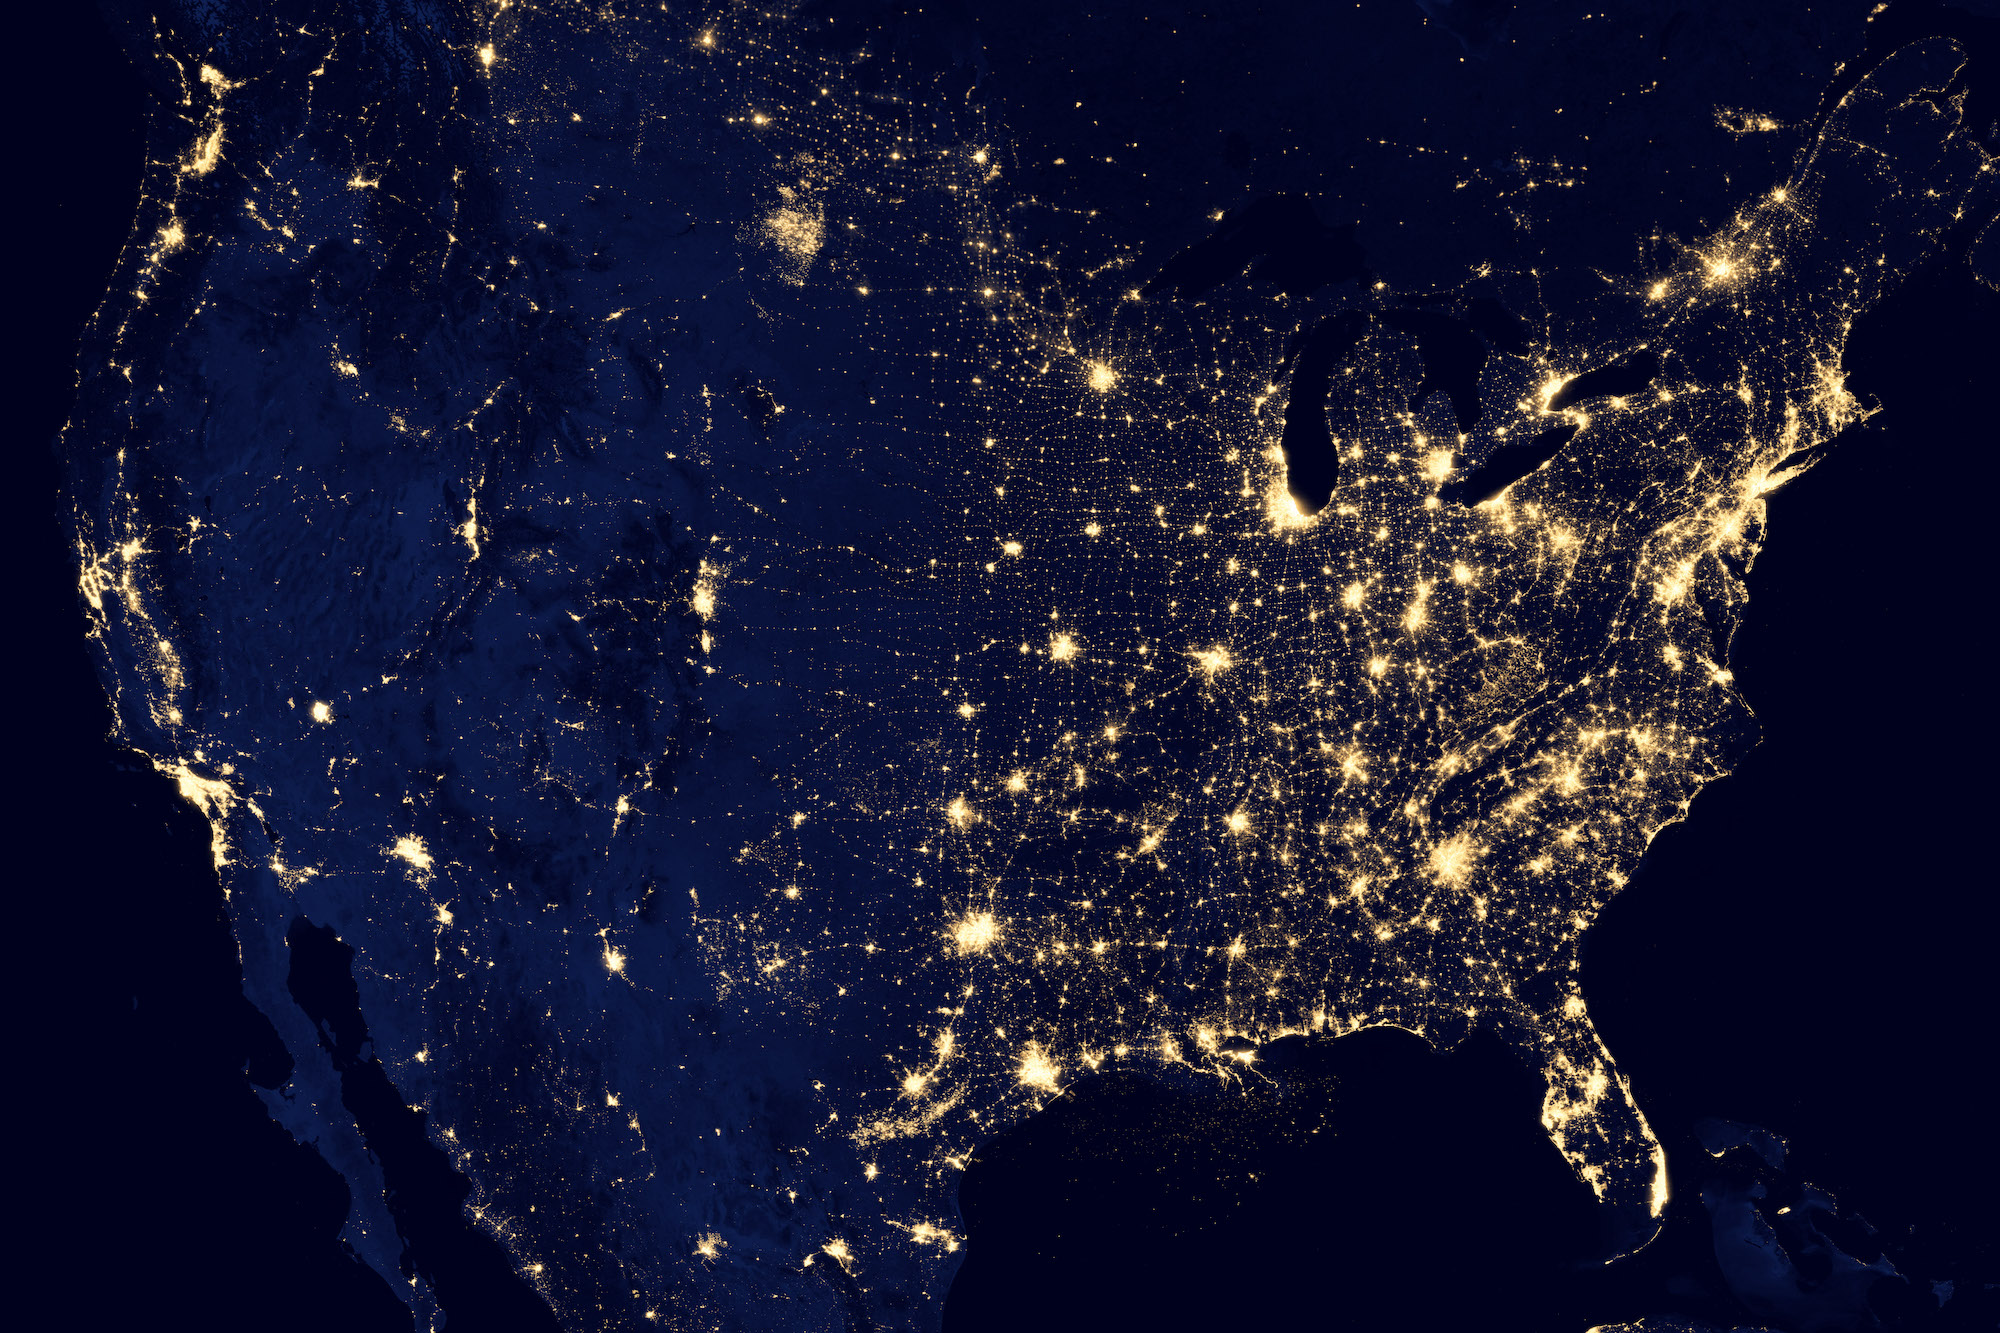 The US is making its biggest investment in broadband internet ever